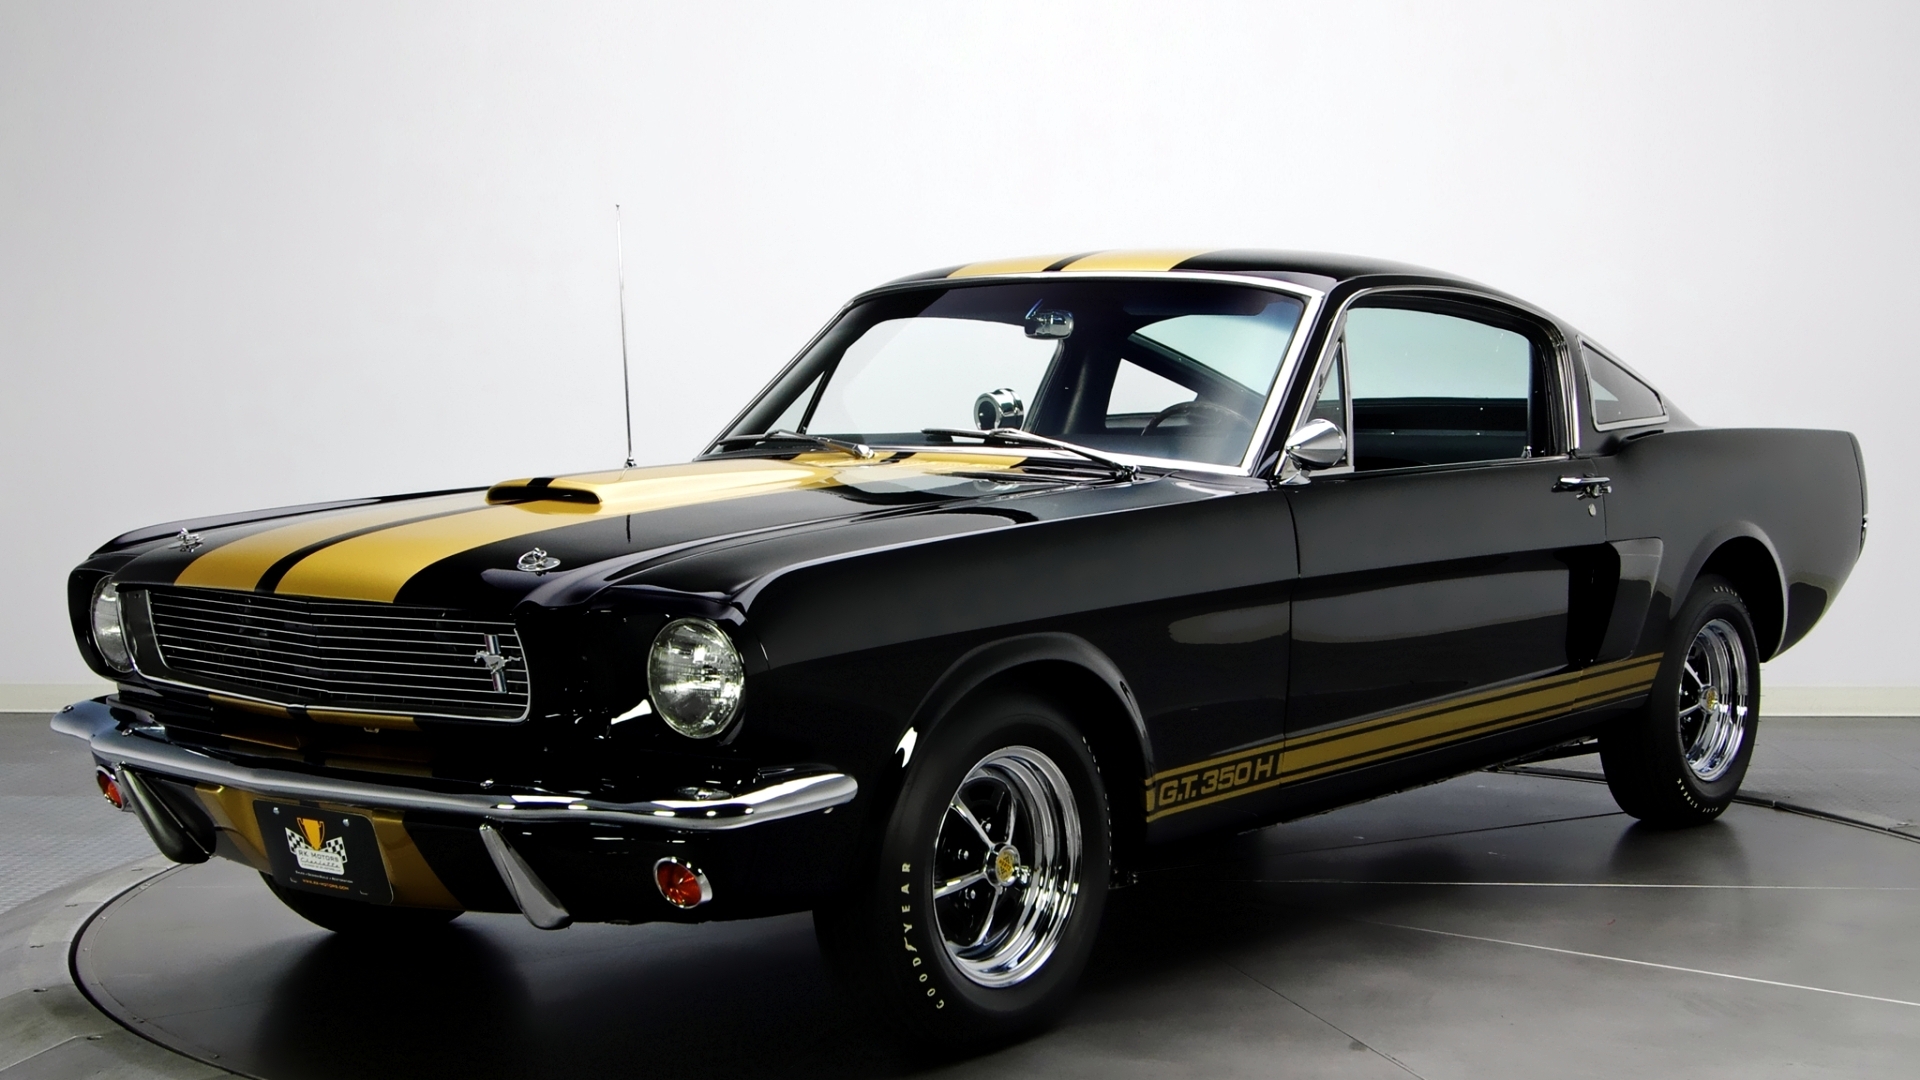 Classic Ford Mustang Shelby Gt350 Wallpaper Ibackgroundwallpaper